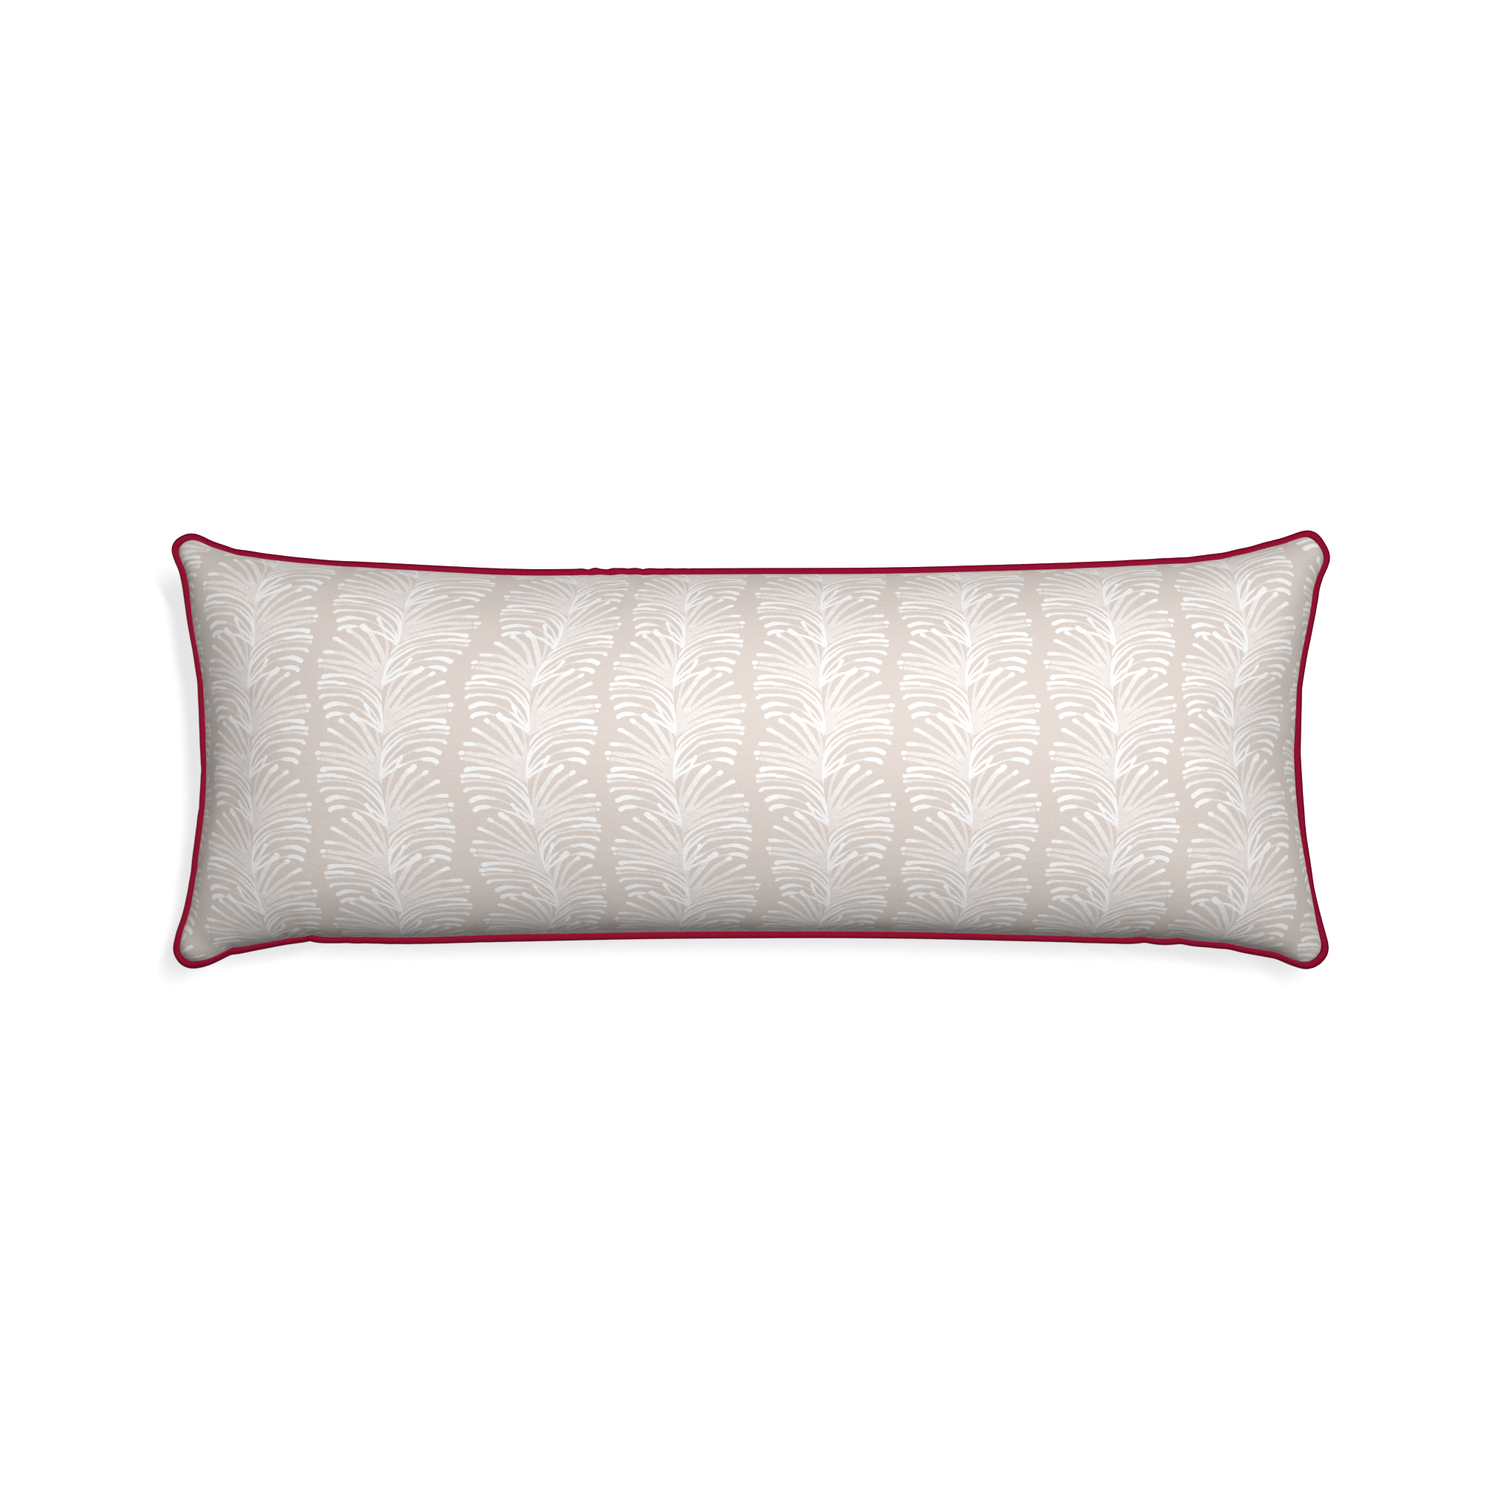 Xl-lumbar emma sand custom sand colored botanical stripepillow with raspberry piping on white background